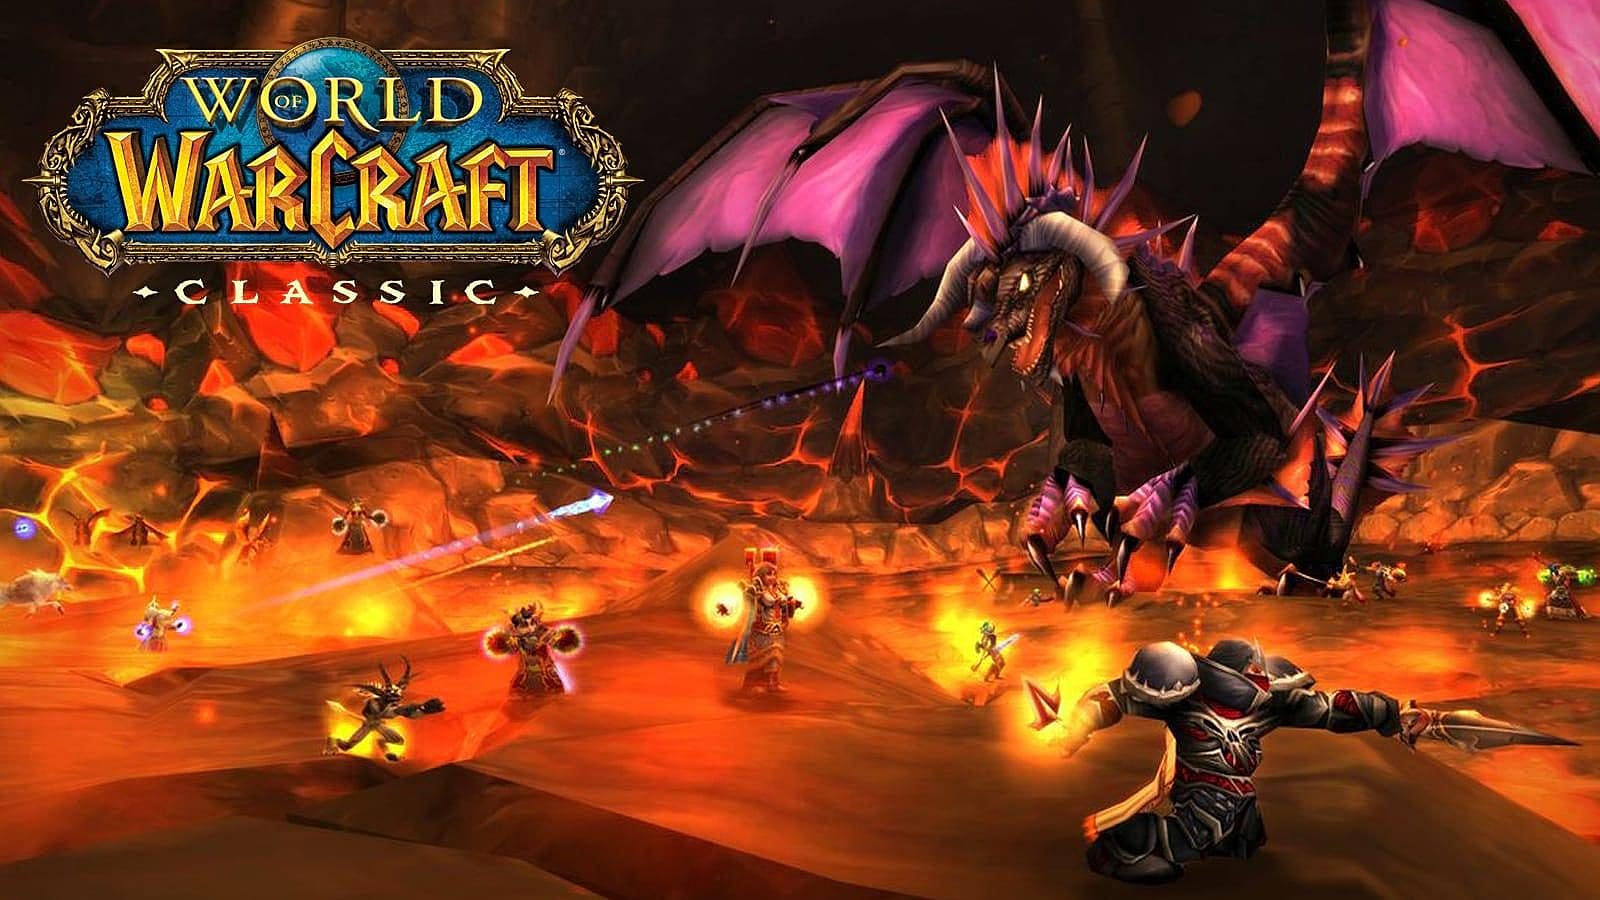 World of Warcraft Classic Impressions: Visiting Azeroth for the First Time